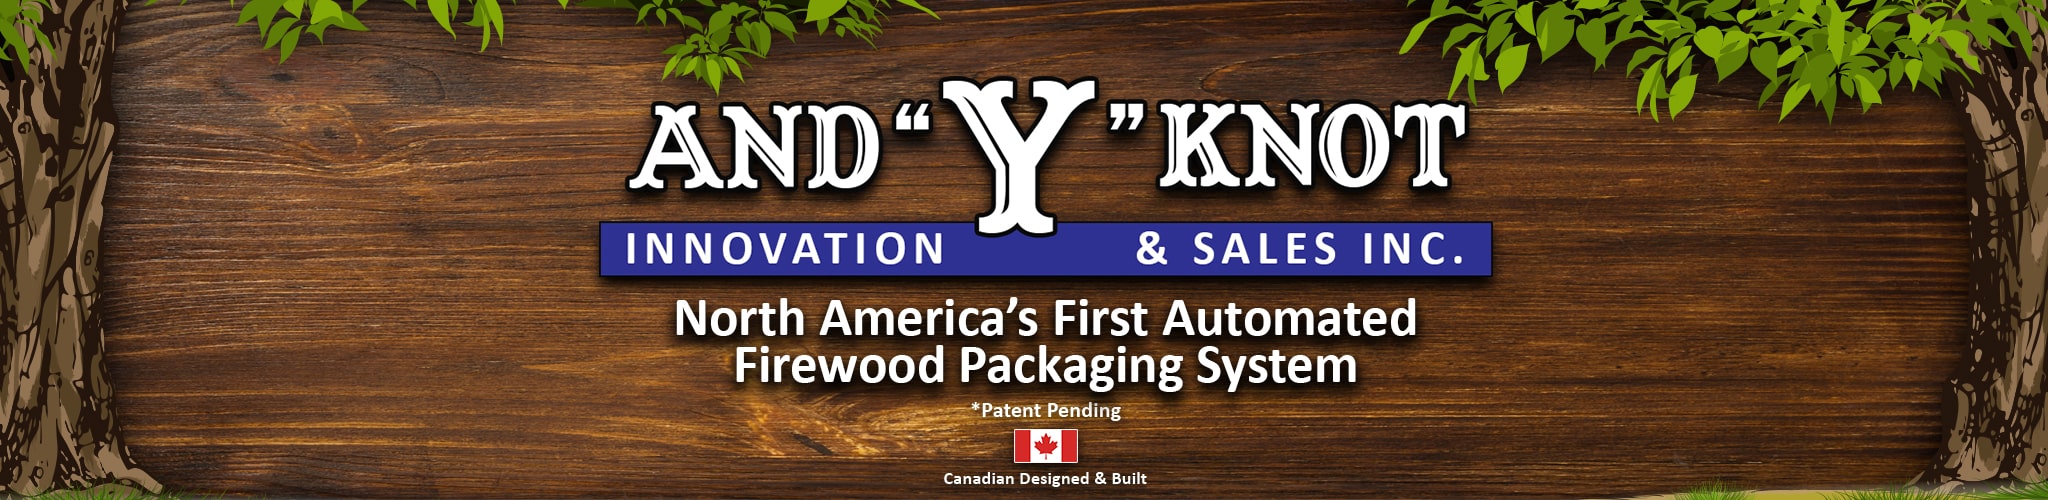 And "Y" Knot - North Americas First Automated Firewood Packaging Machine - Patent Pending